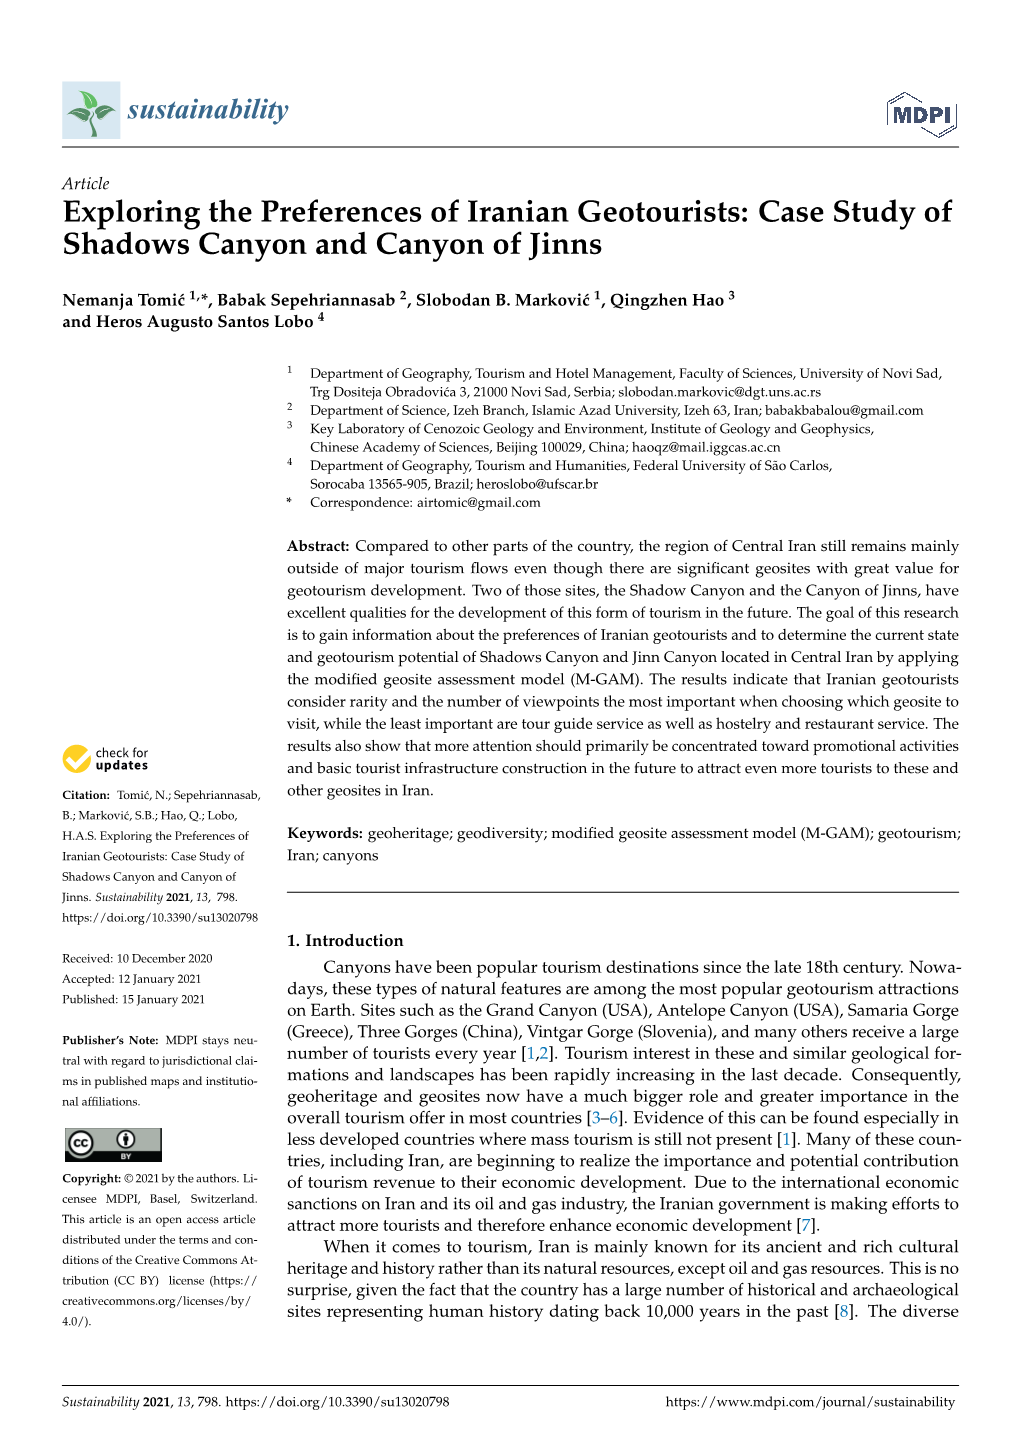 Exploring the Preferences of Iranian Geotourists: Case Study of Shadows Canyon and Canyon of Jinns